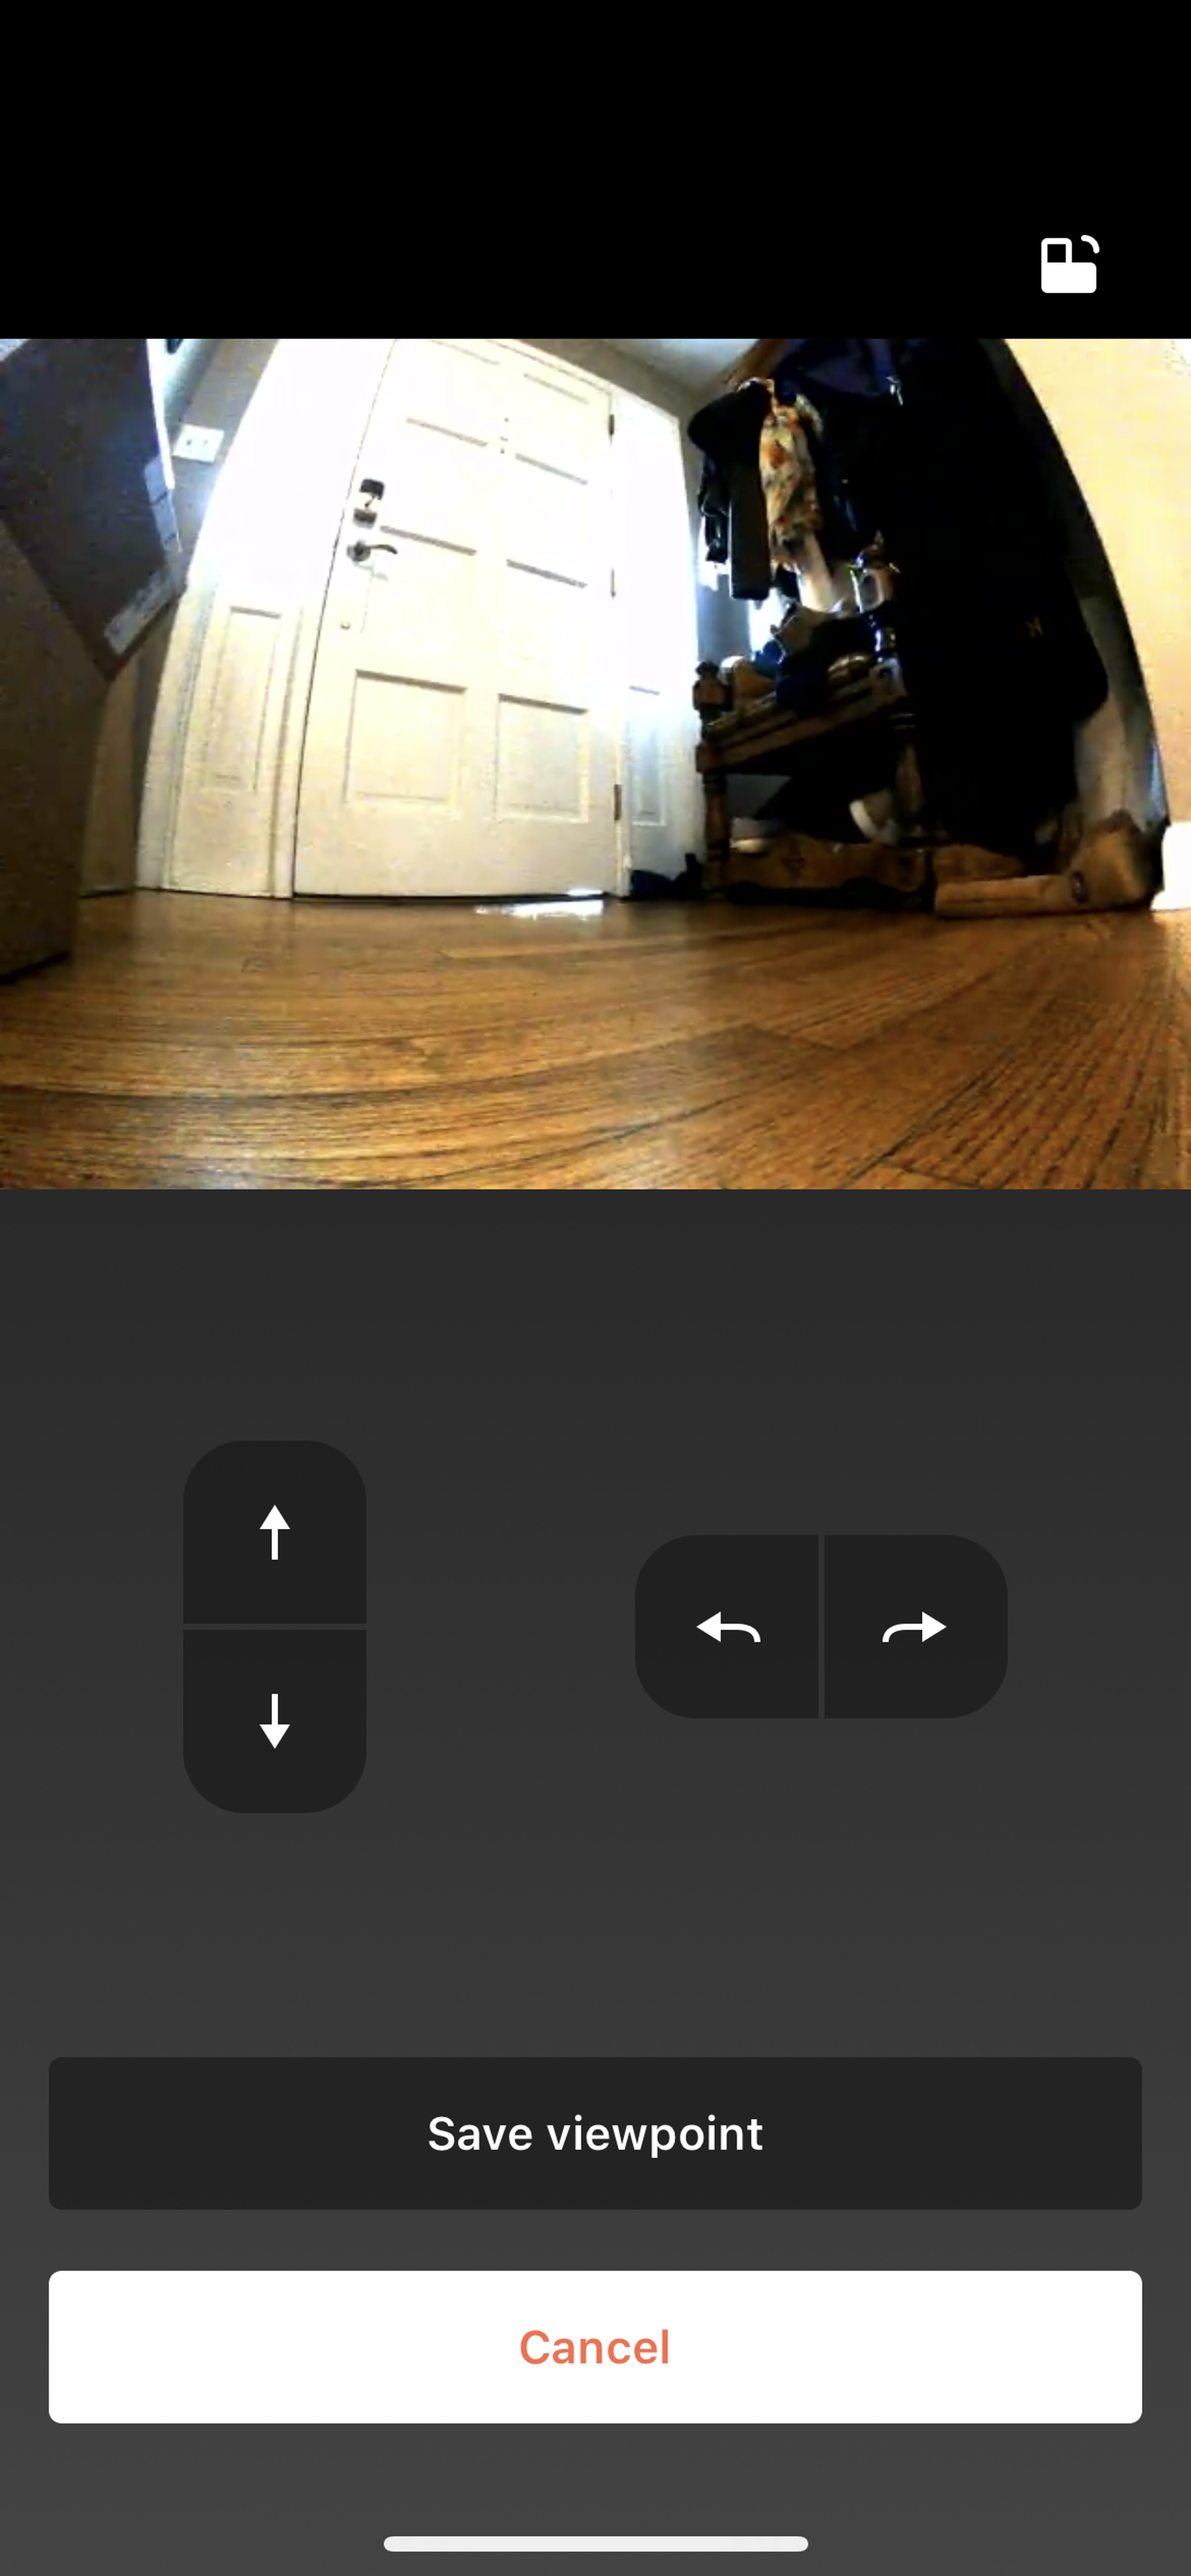 <em>You can create viewpoints in the app and use a remote control function to move the robot around.</em>